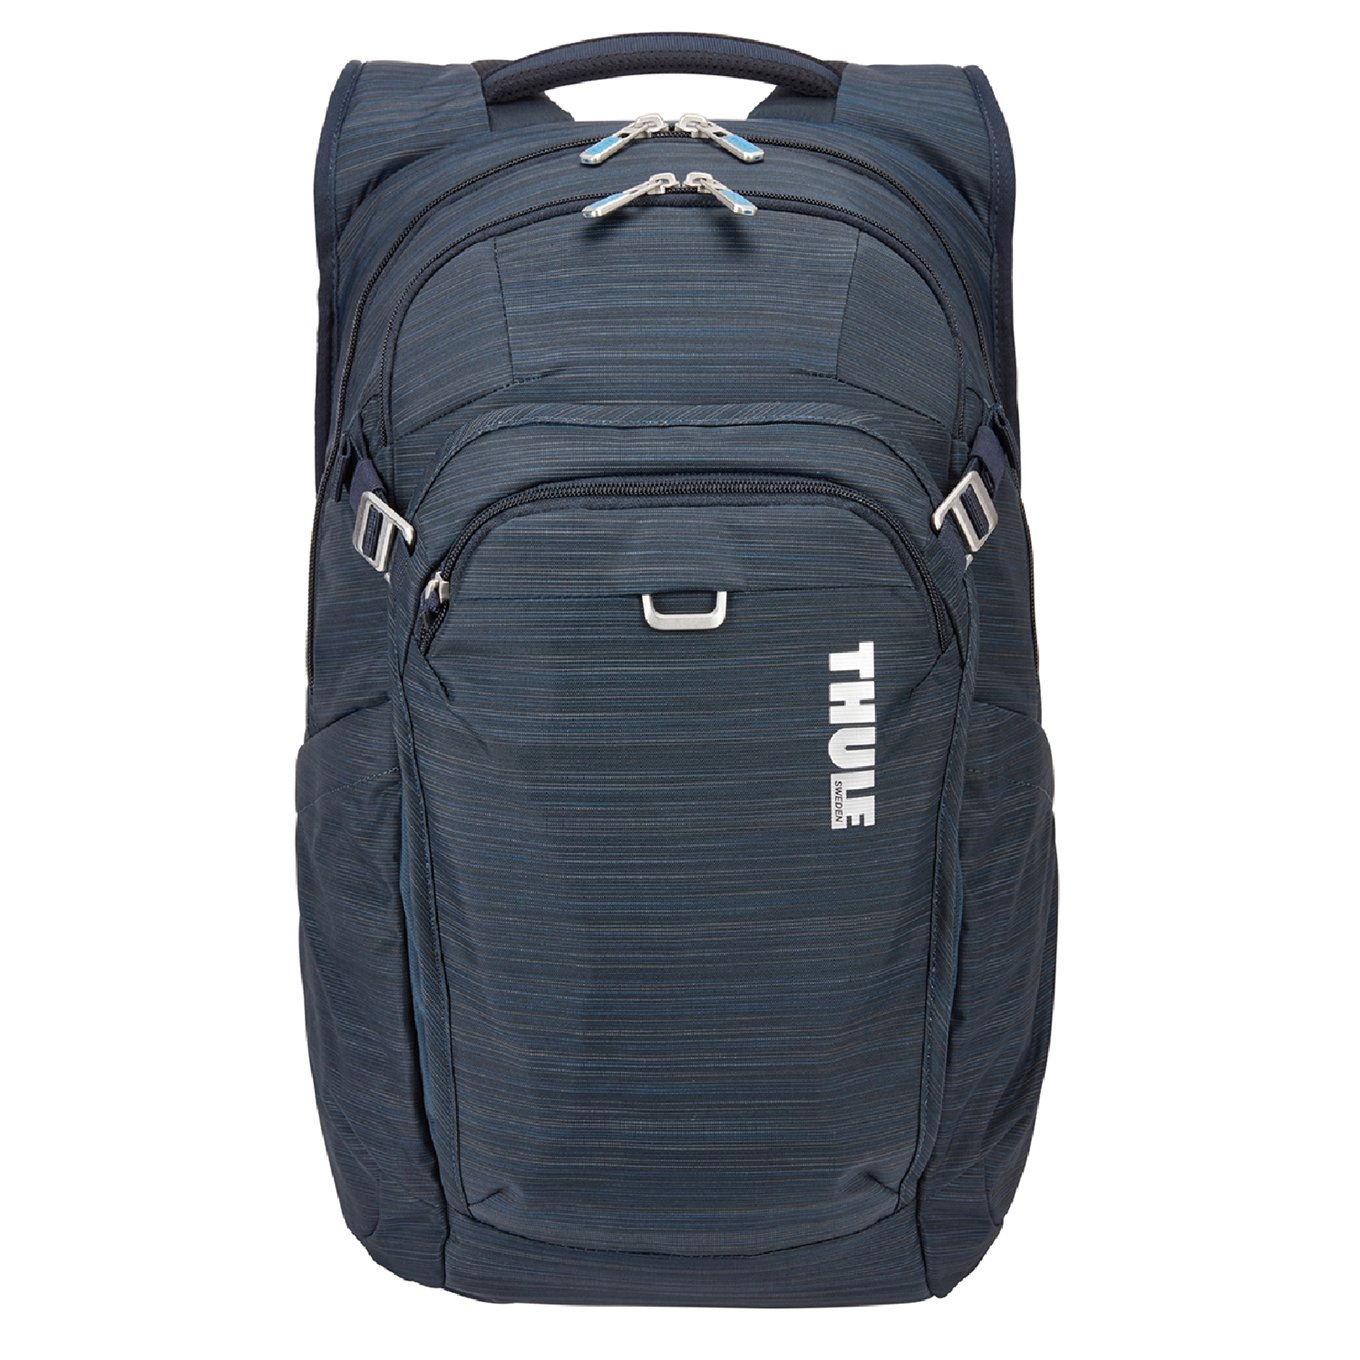 Thule Construct Backpack 24L carbon blue backpack